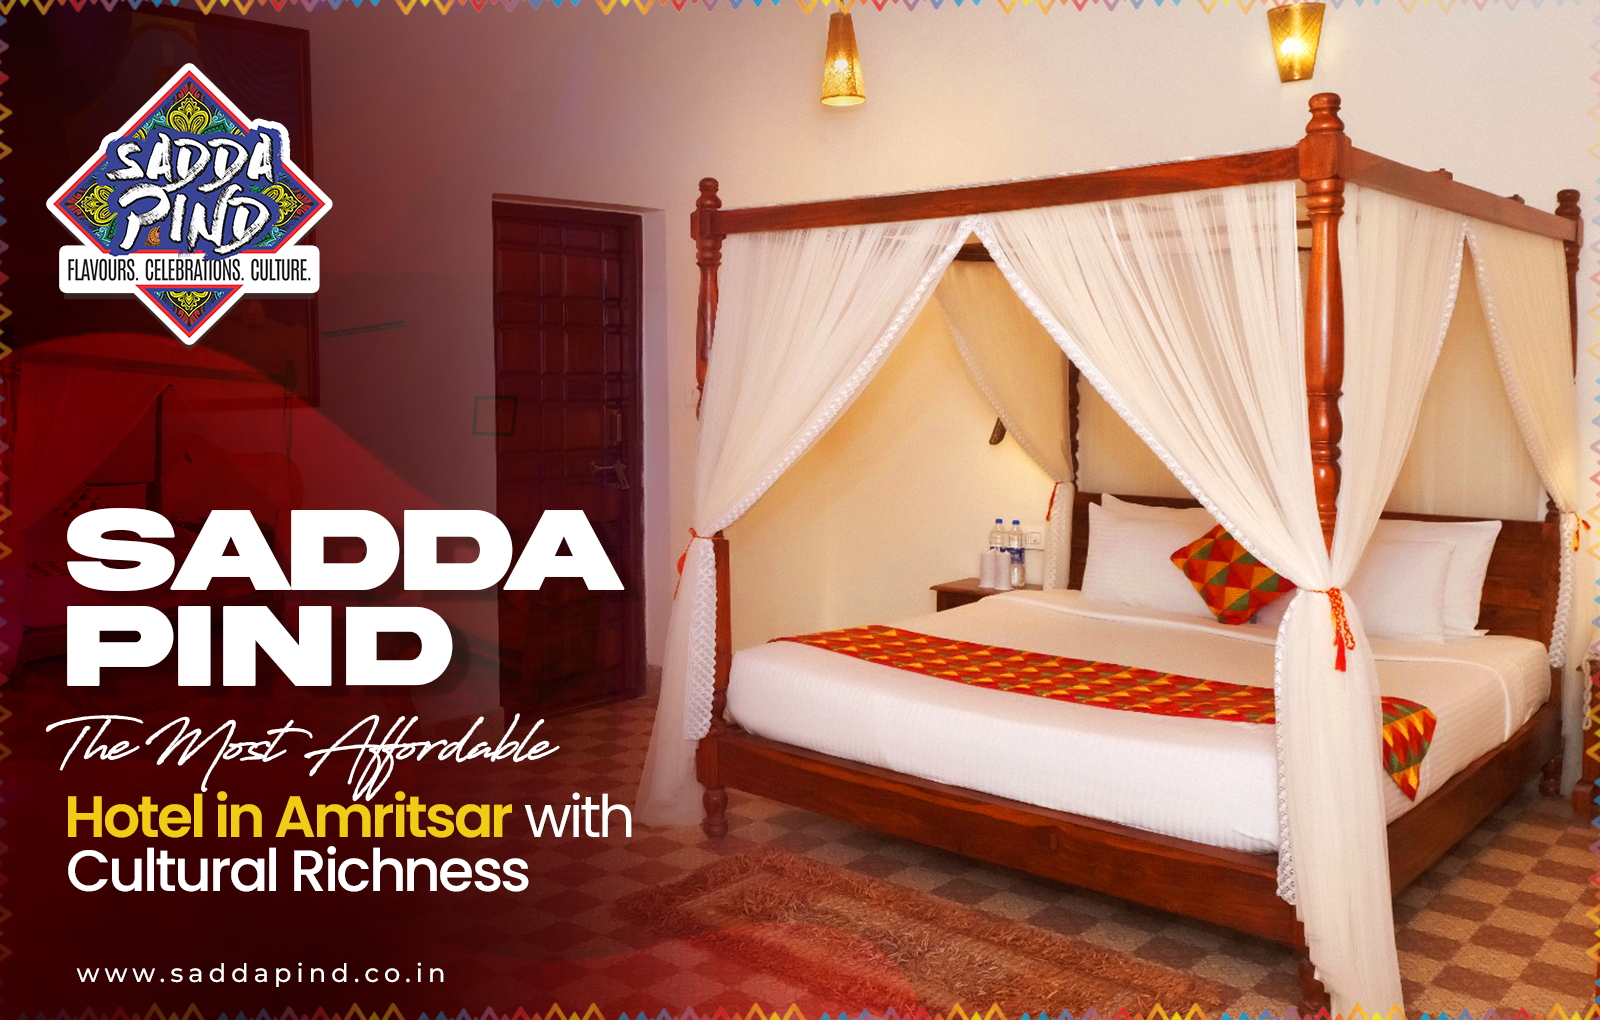 Sadda Pind: The Most Affordable Hotel in Amritsar with Cultural Richness
